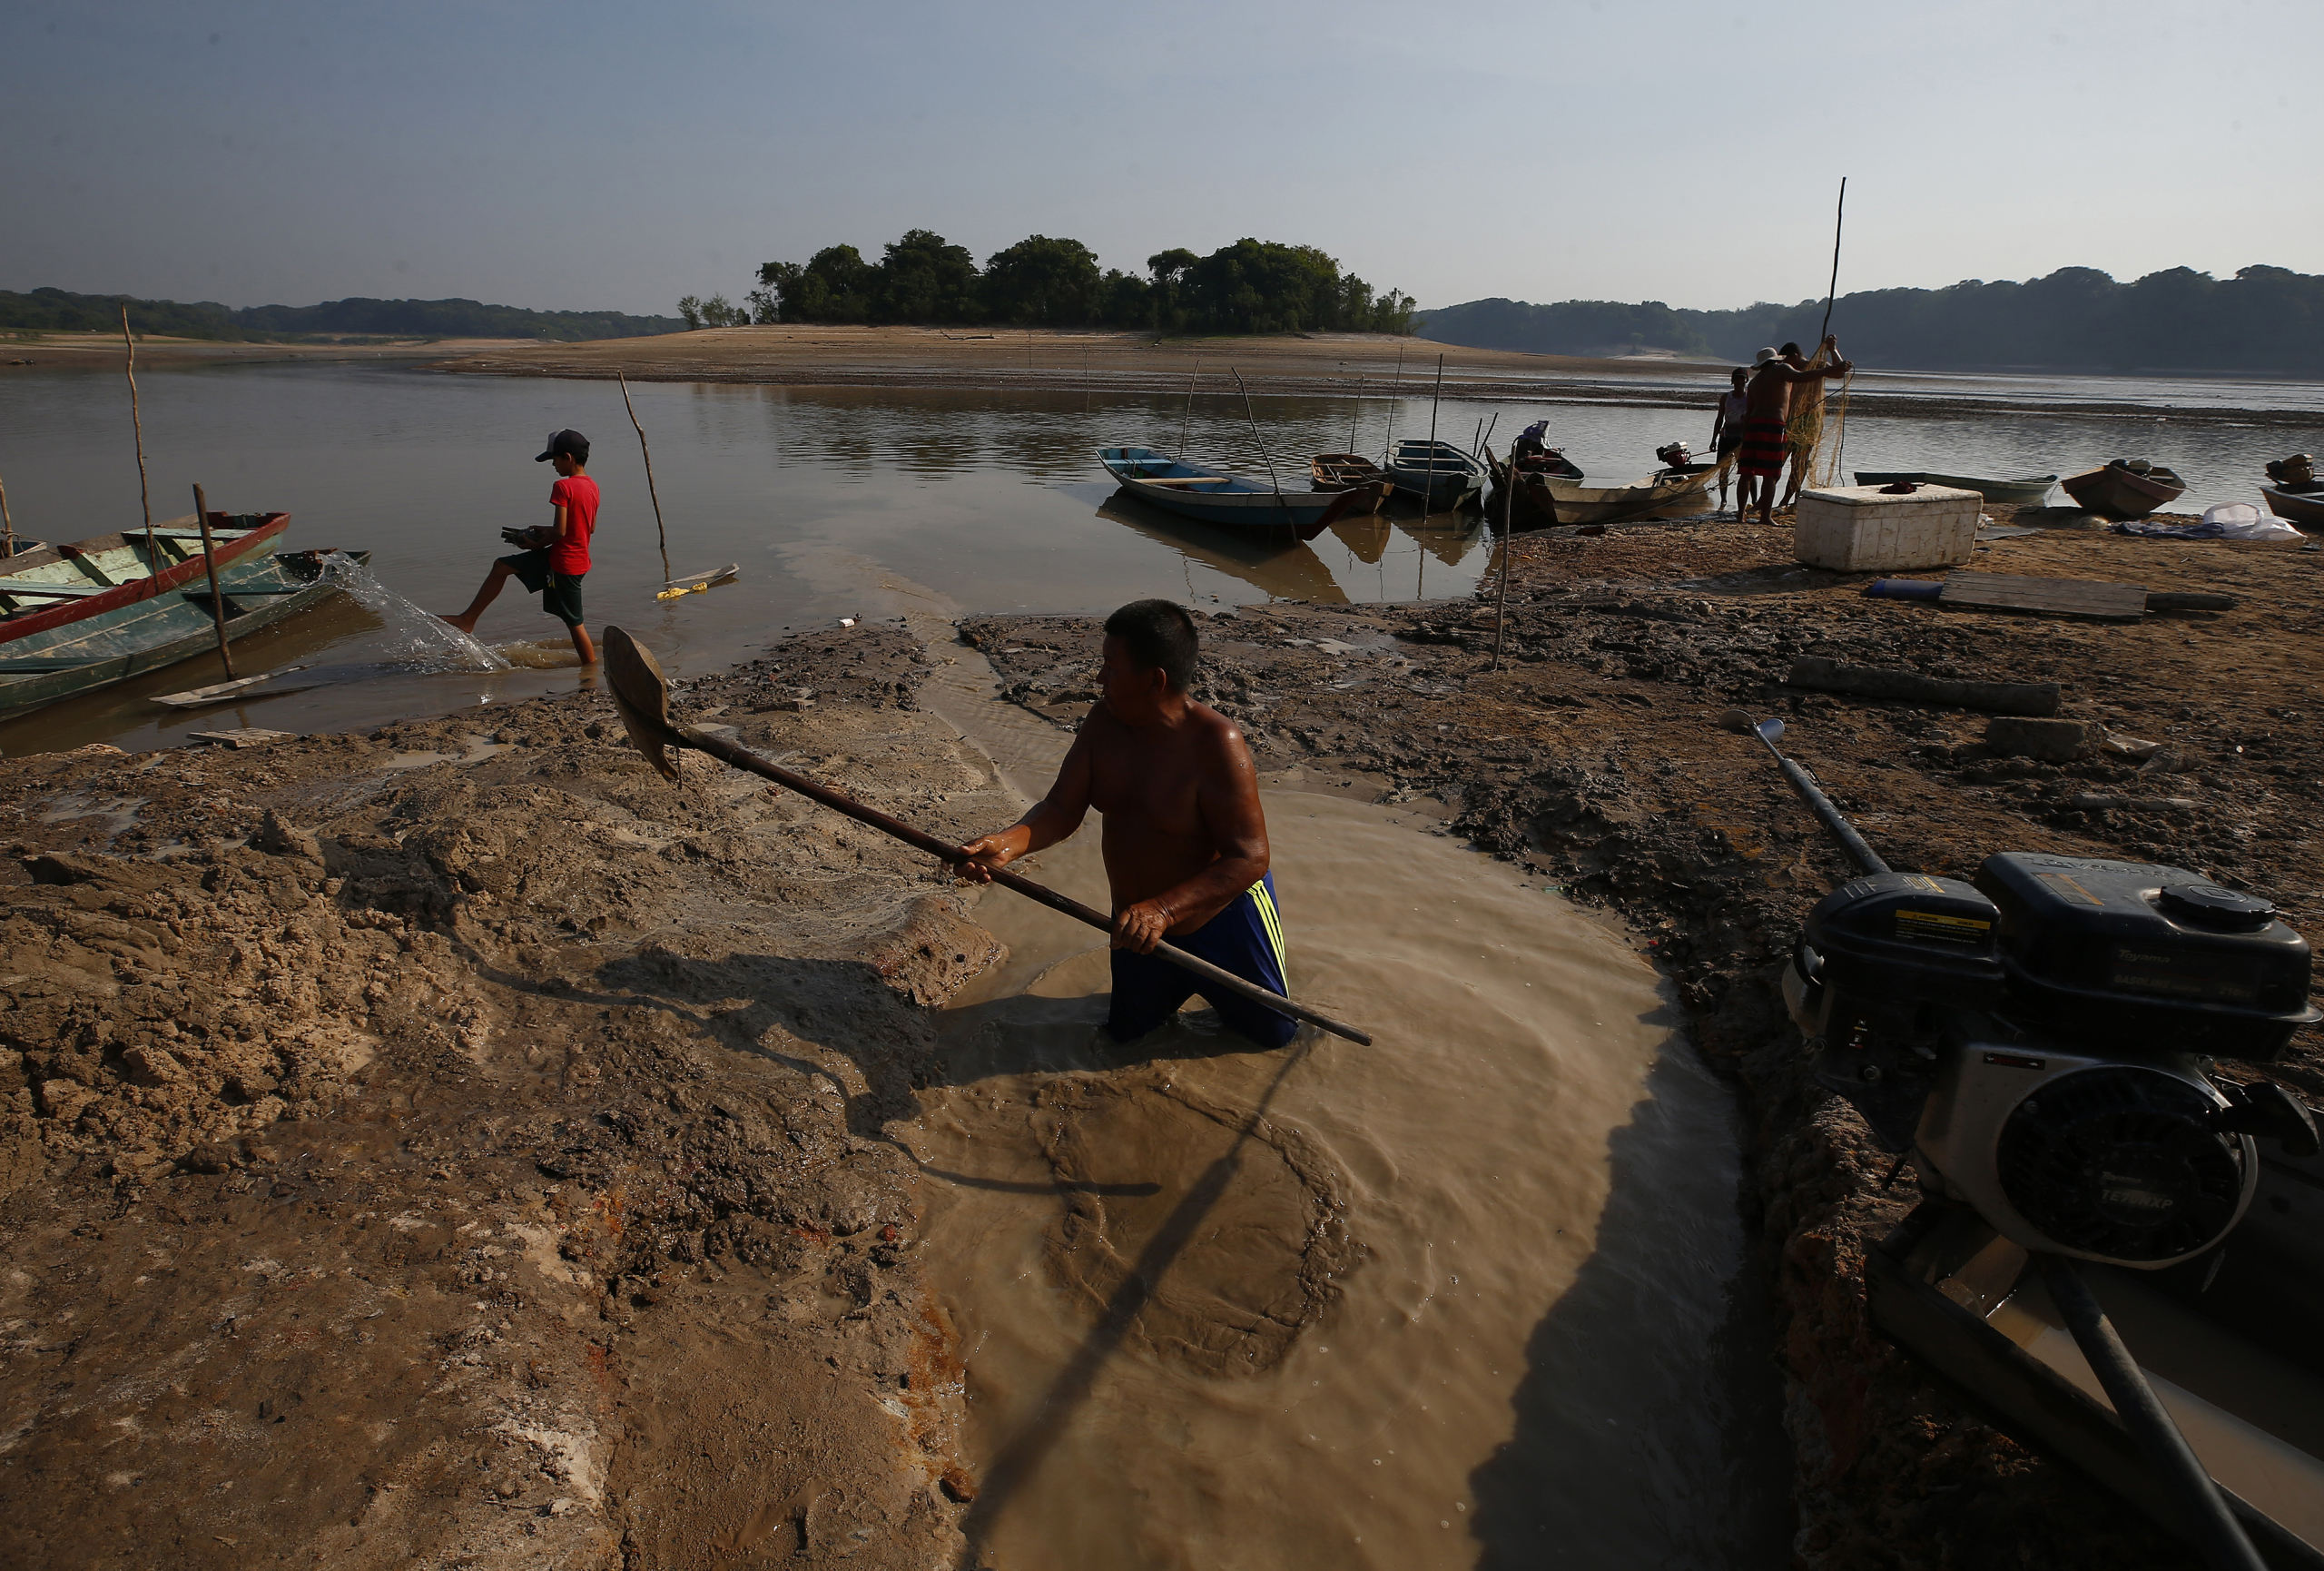 Francisco Carlos de Oliveira Rodrigues digs into the dry bed of Puraquequara lake to obtain water amid a severe drought, in Manaus, Amazonas state, Brazil, Thursday, Oct. 5, 2023. The Brazilian Amazon rainforest is facing a severe drought that may affect around 500,000 people by the end of the year. (AP Photo/Edmar Barros)

Associated Press/LaPresse
Only Italy and Spain